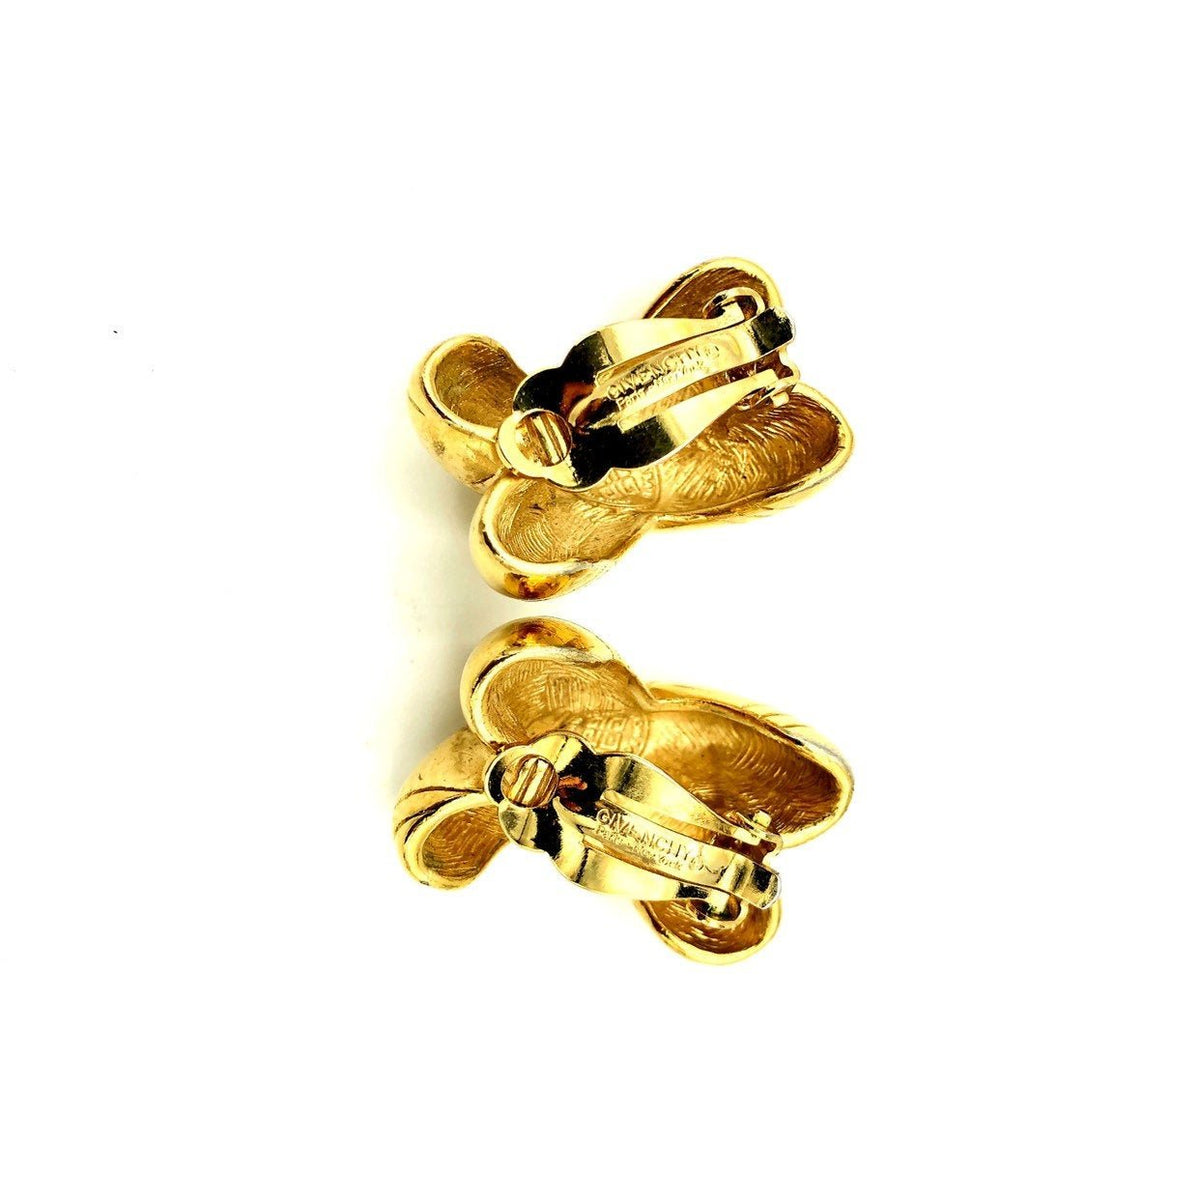 Givenchy Puffy 'X' Vintage Clip-On Earrings - 24 Wishes Vintage Jewelry